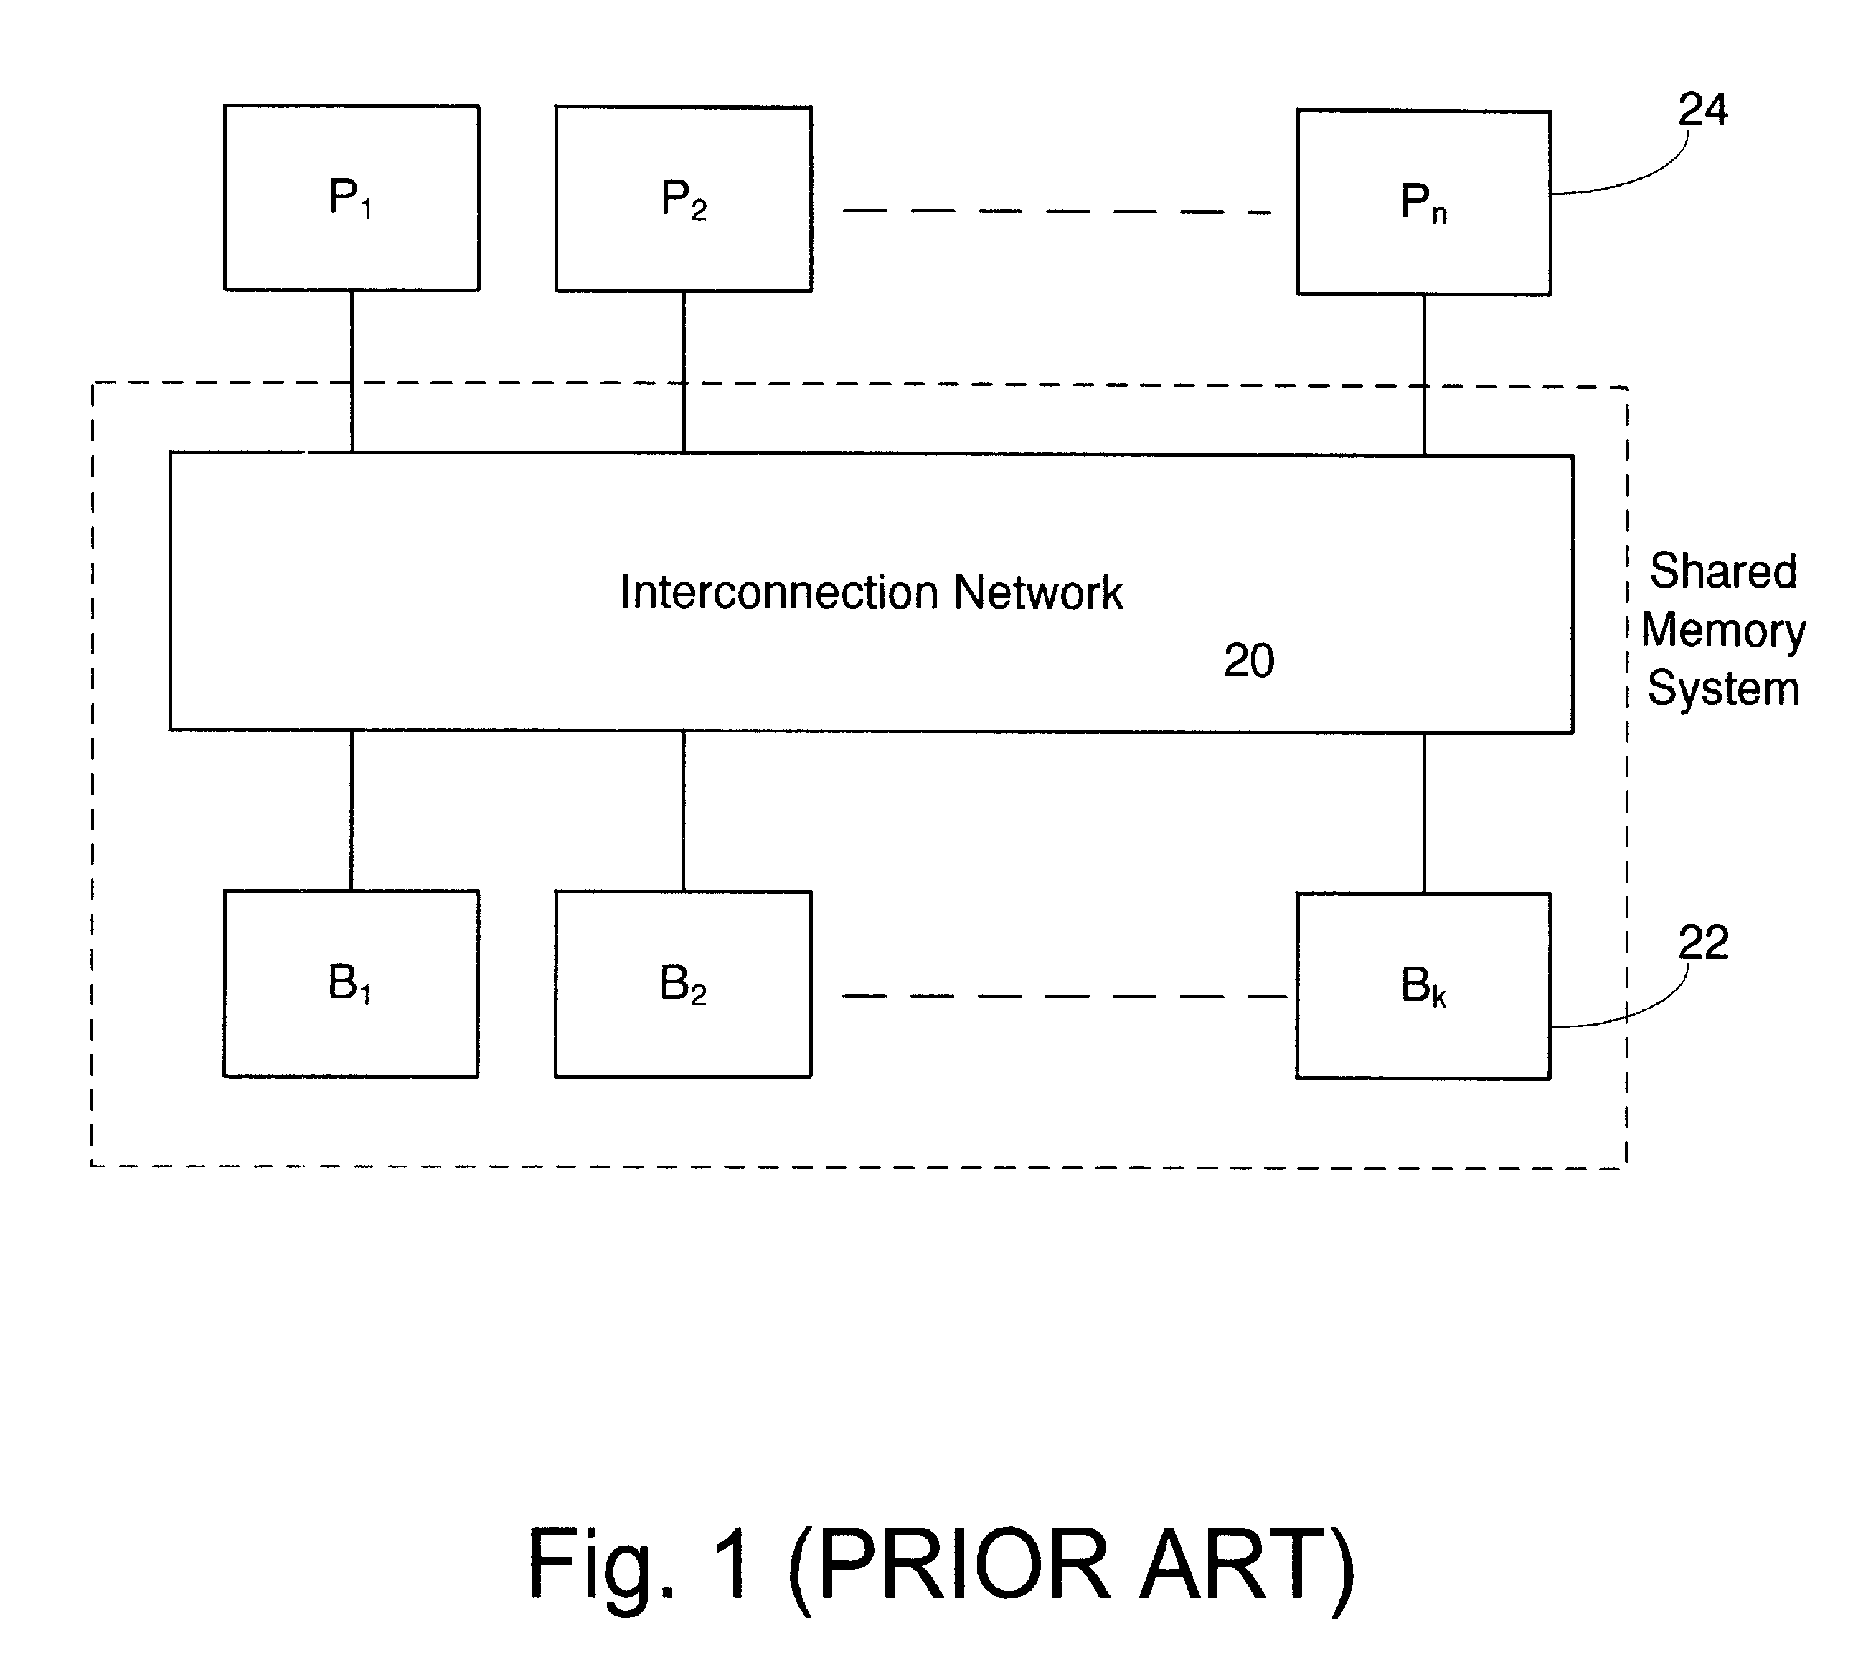 Shared memory system for a tightly-coupled multiprocessor